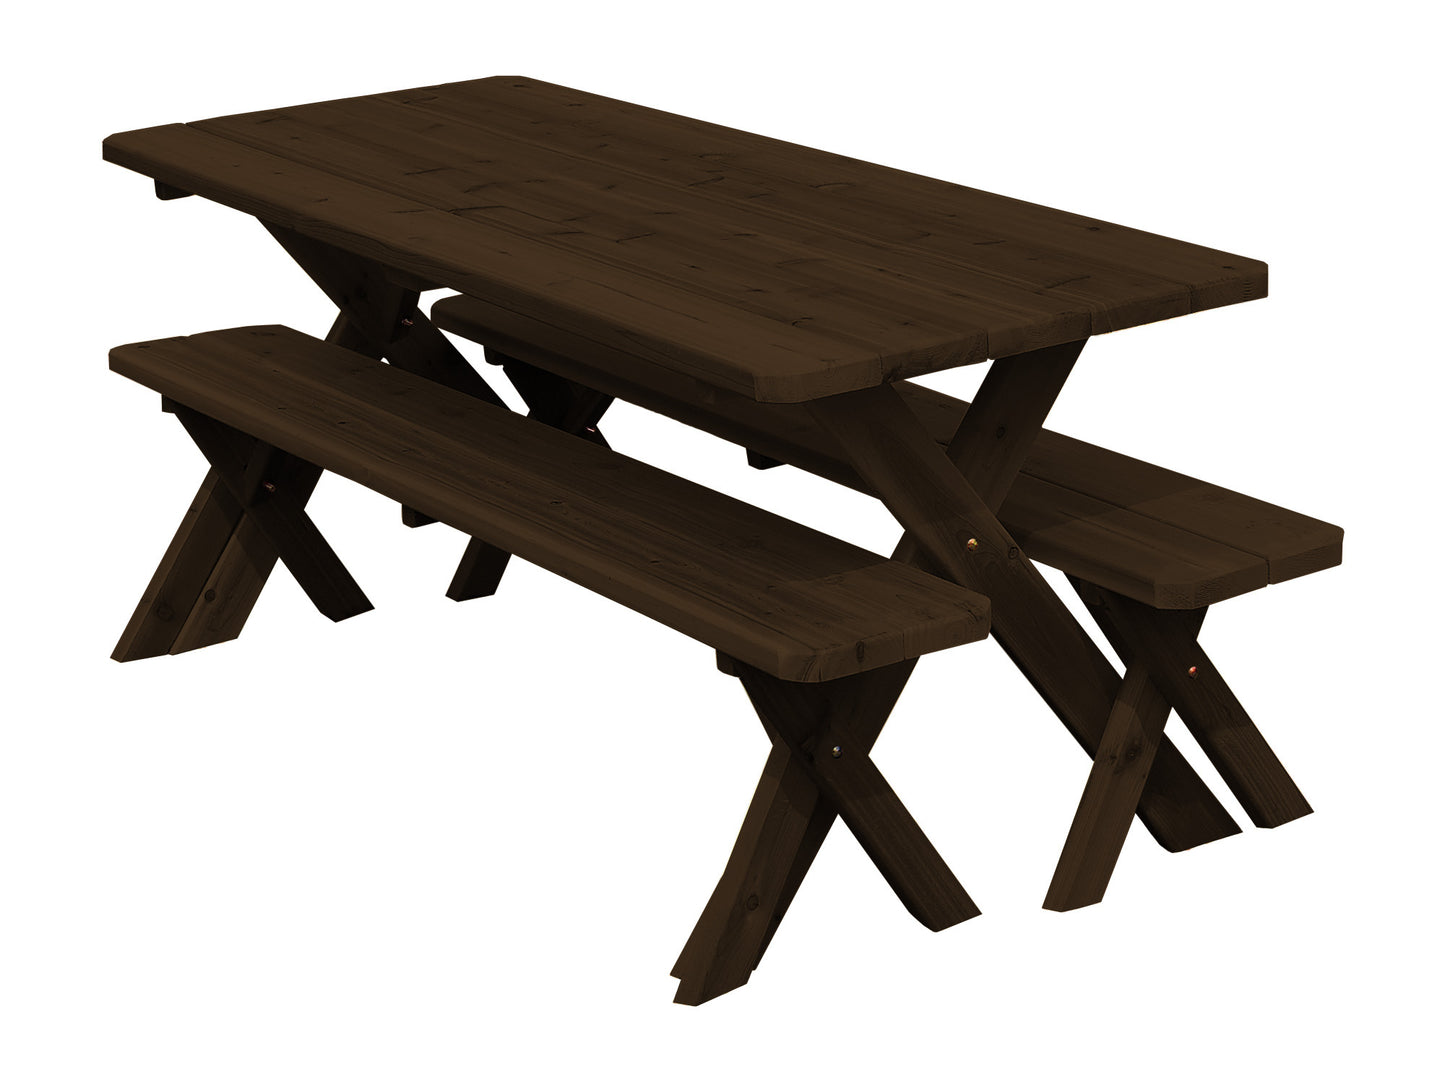 A&L FURNITURE CO. Western Red Cedar 8' Cross-leg Picnic Table w/4  4' Benches - Specify for FREE 2" Umbrella Hole - LEAD TIME TO SHIP 2 WEEKS